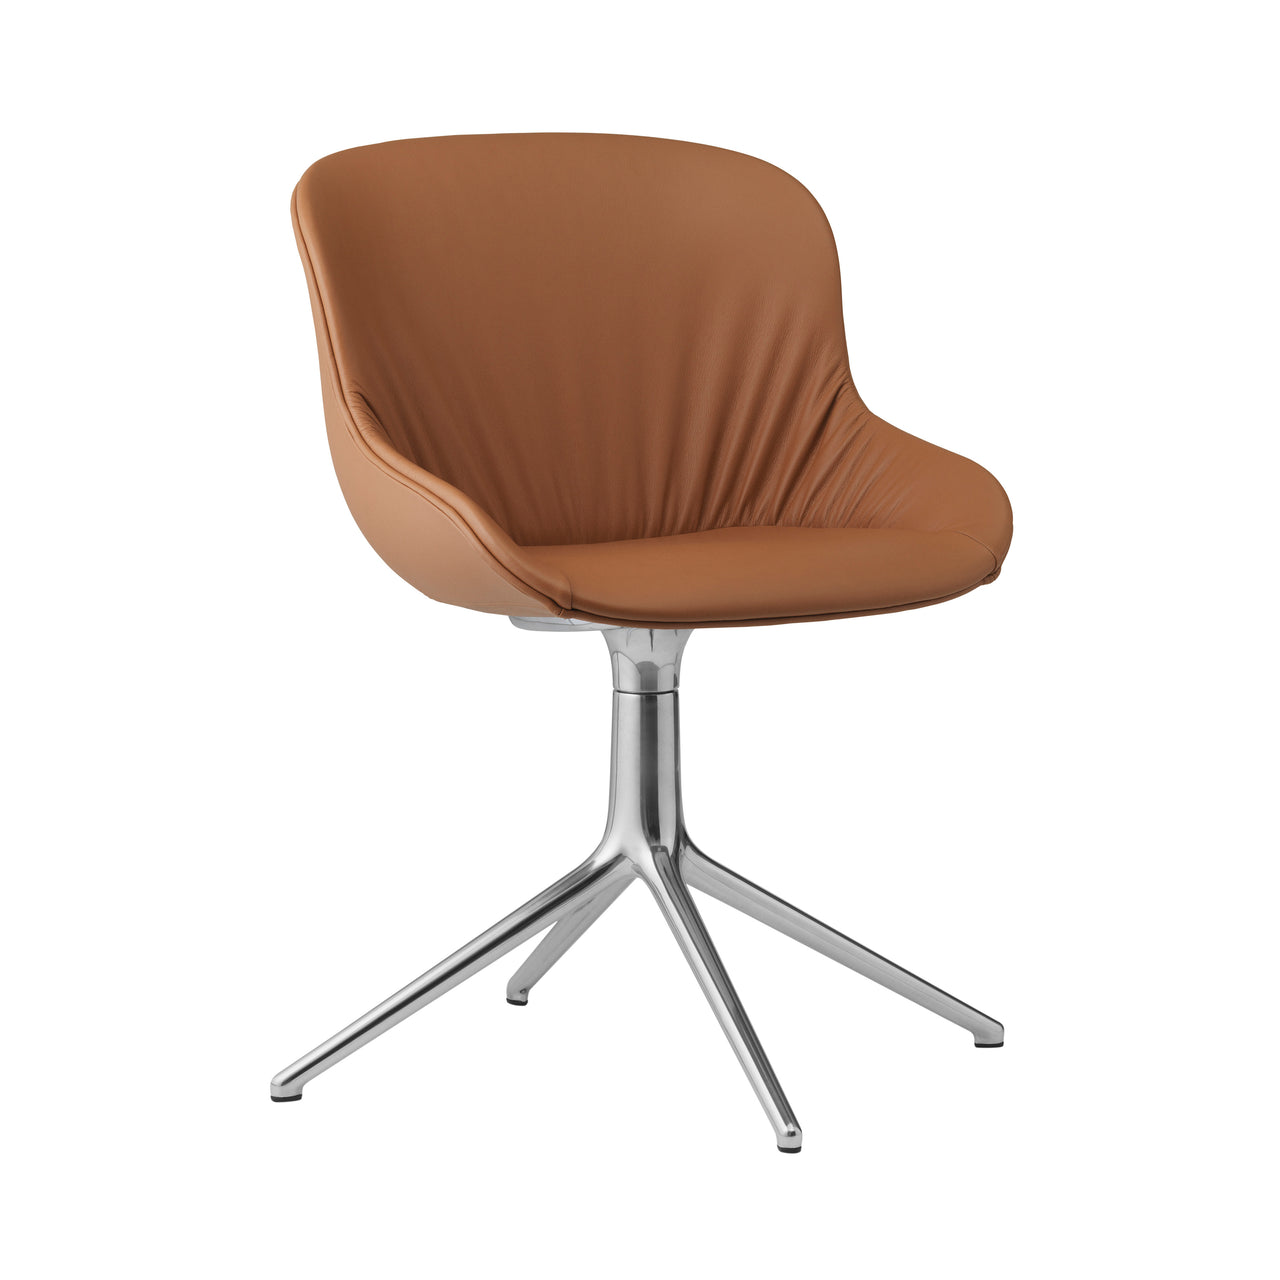 Hyg 4 Legs Comfort Chair: Swivel Base + Full Upholstered + Aluminum + Without Casters